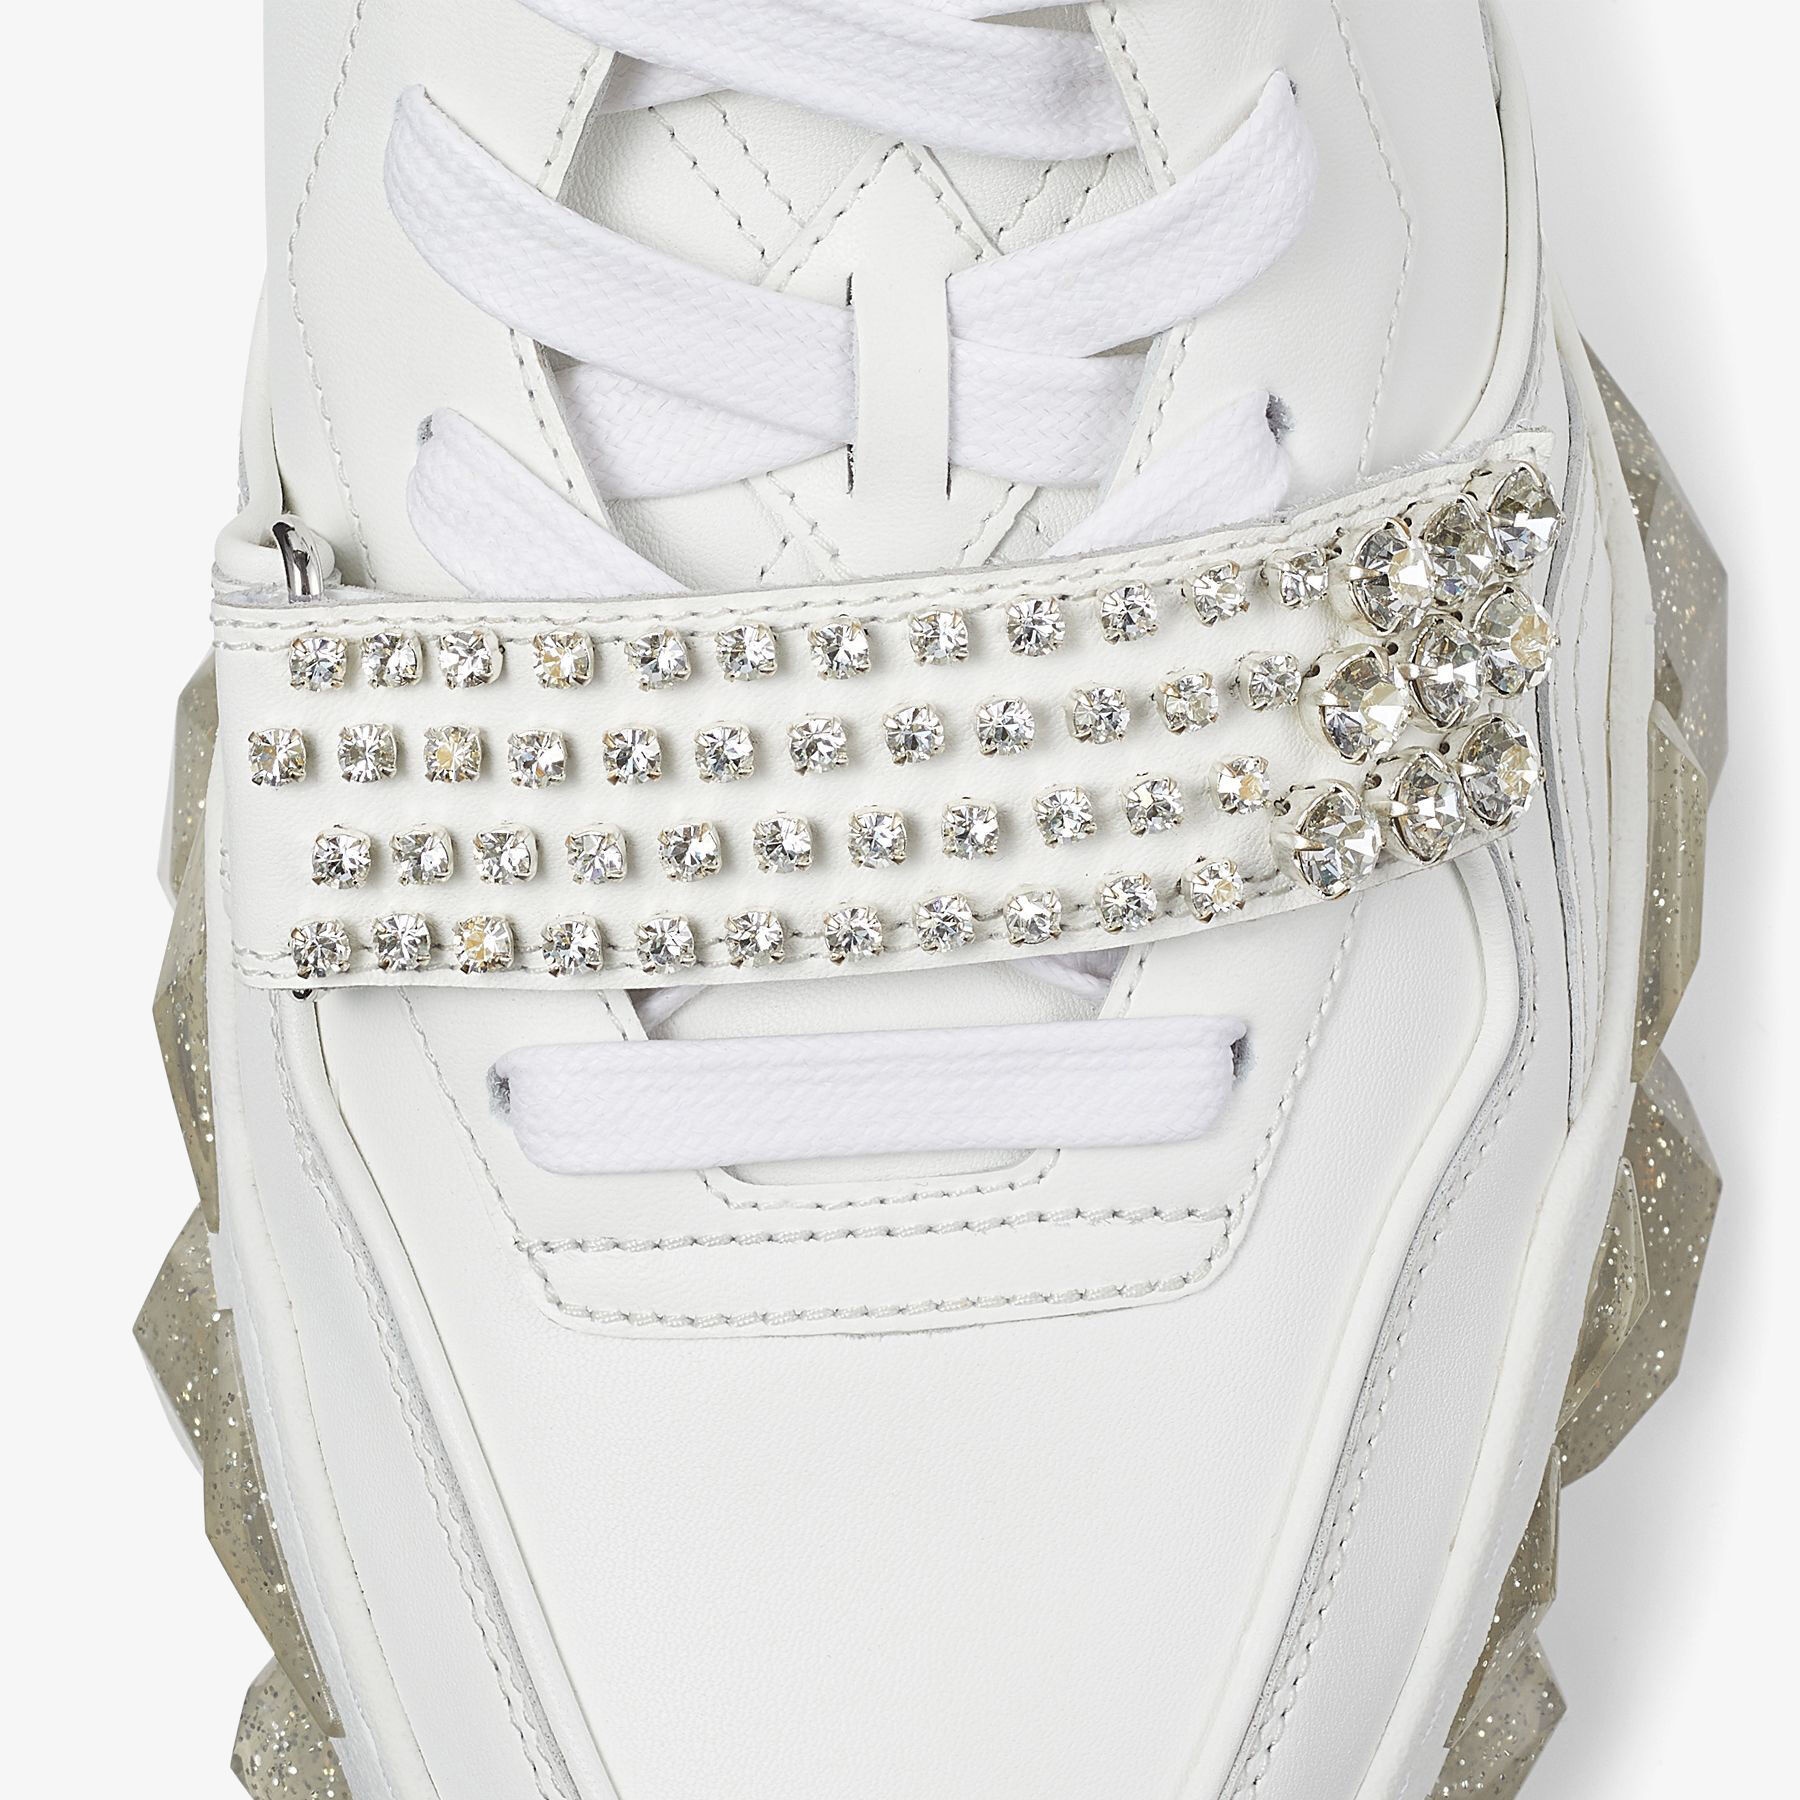 Diamond X Strap/M
X White Calf Leather Low Top Trainers with Crystal Strap - 6